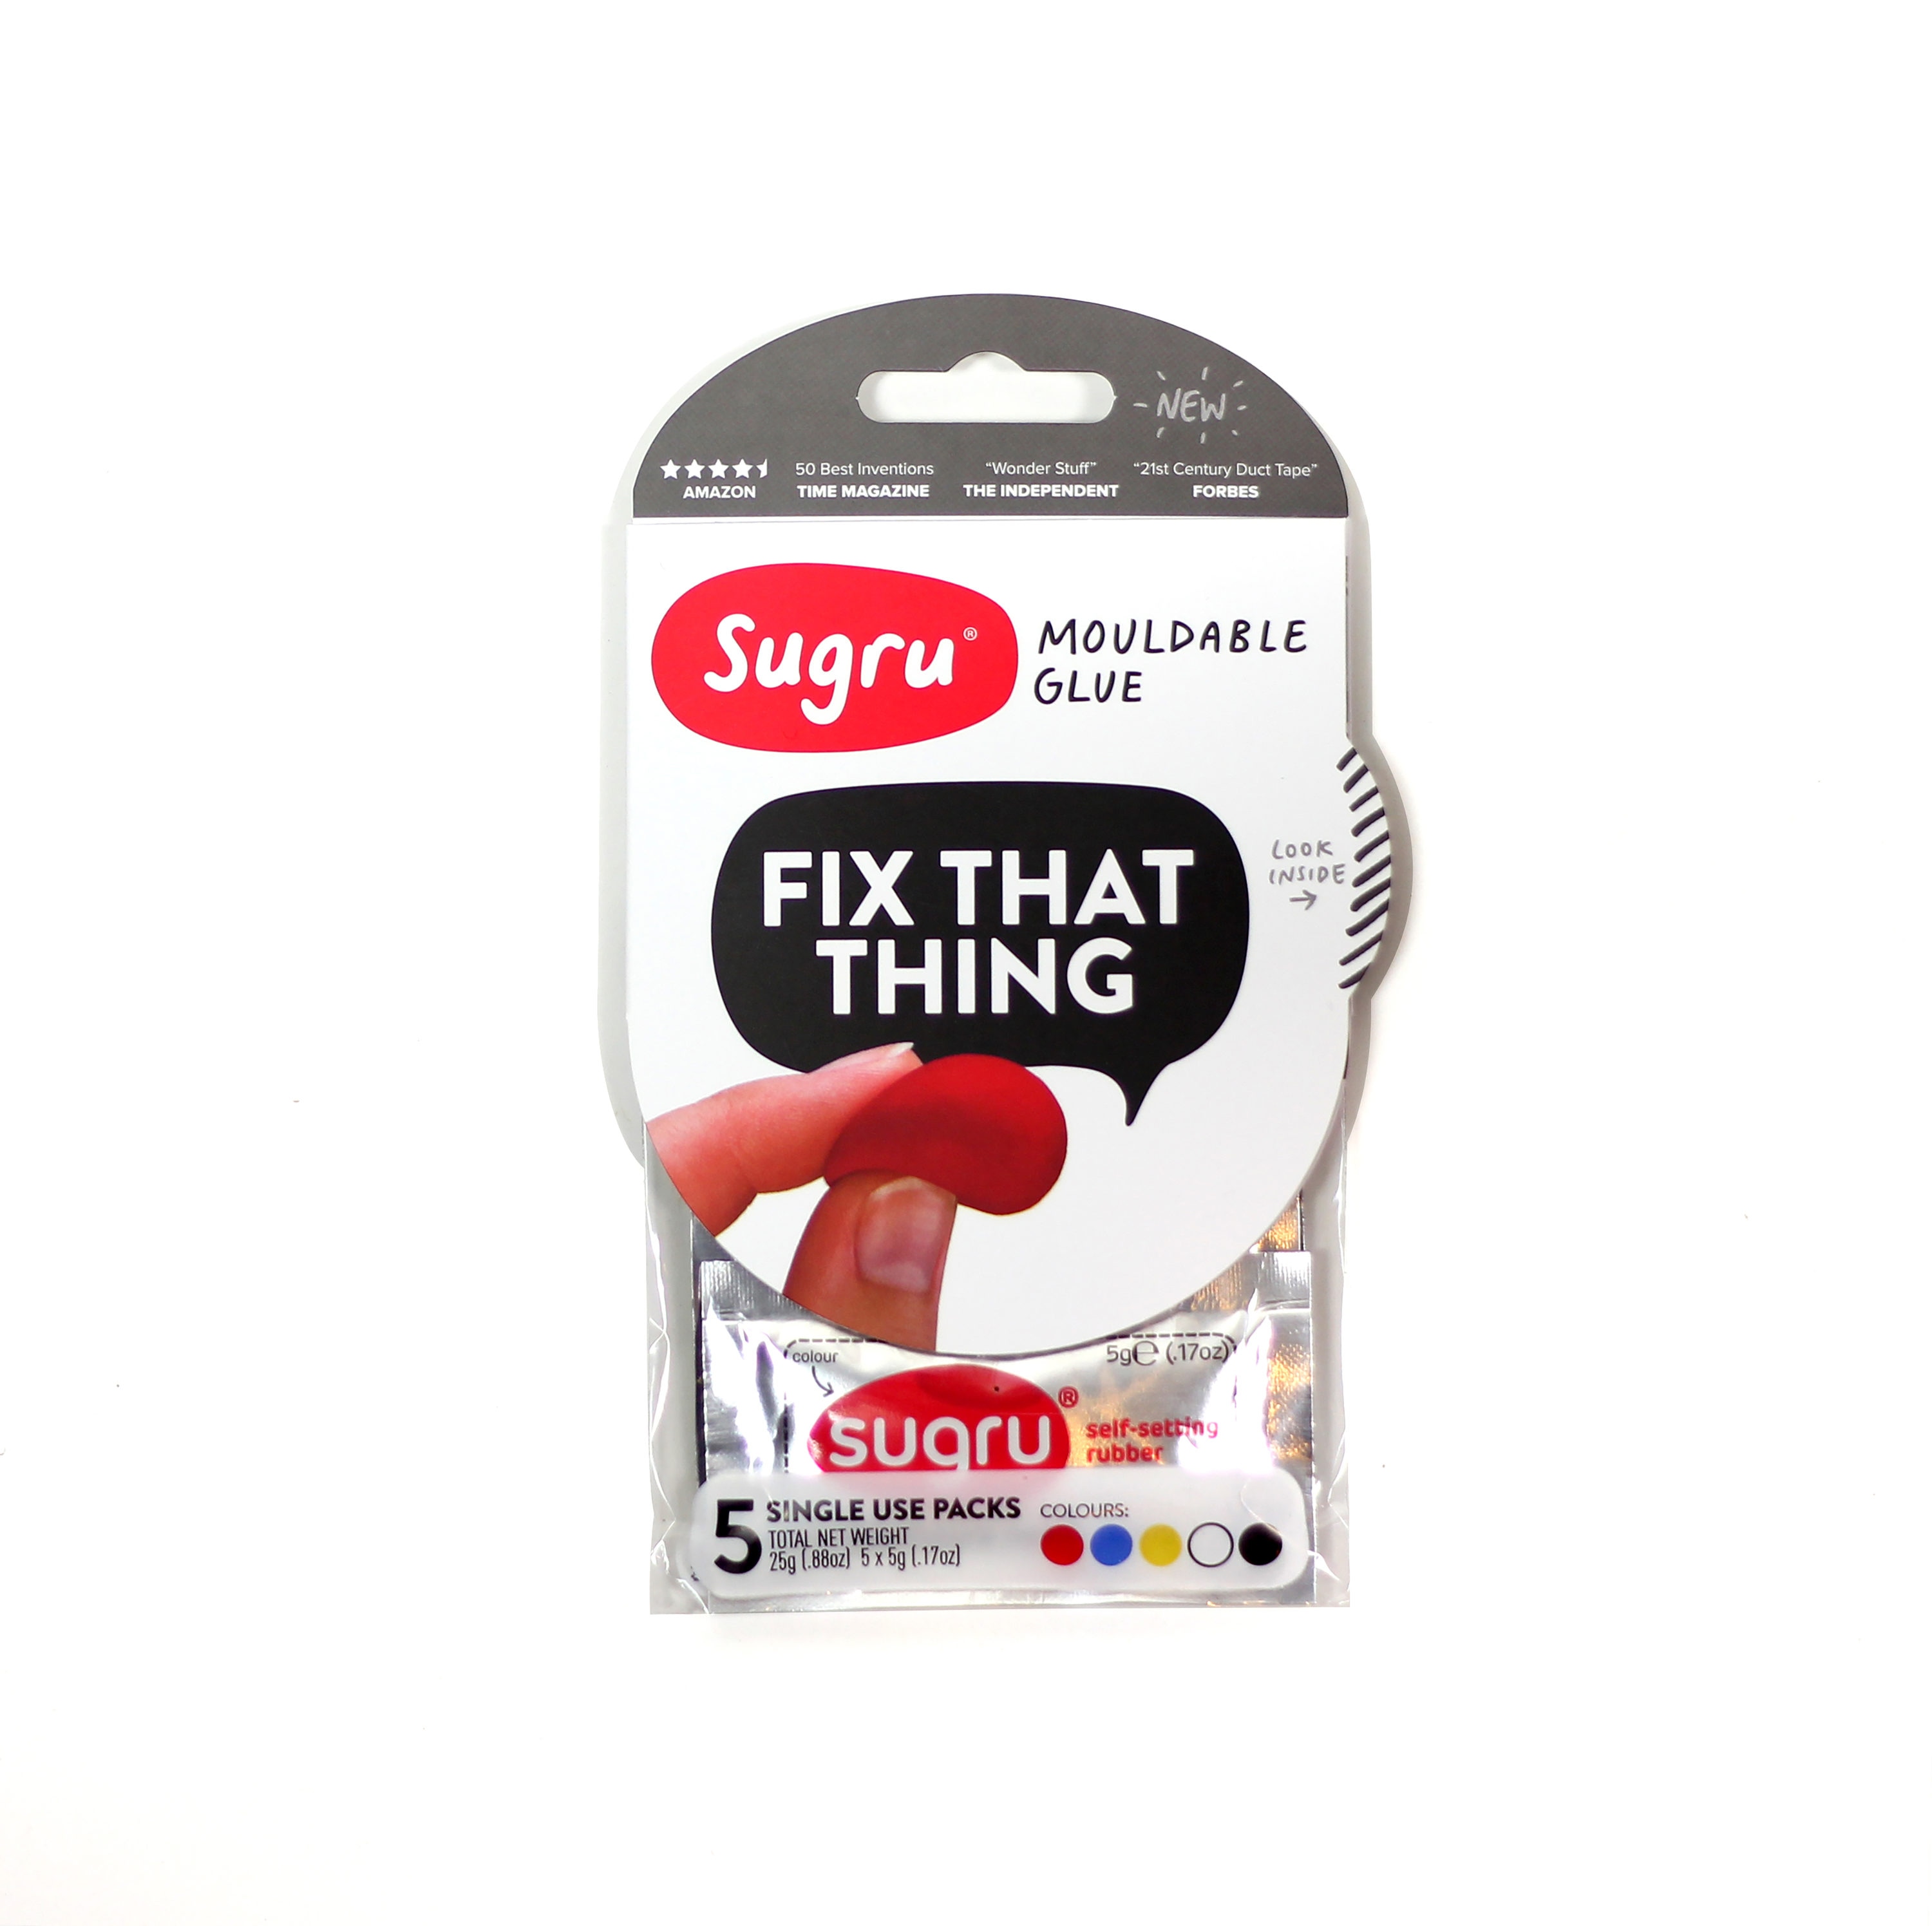 Sugru Mouldable Glue Colorful 5 pack 0.51-oz Adhesive Putty at